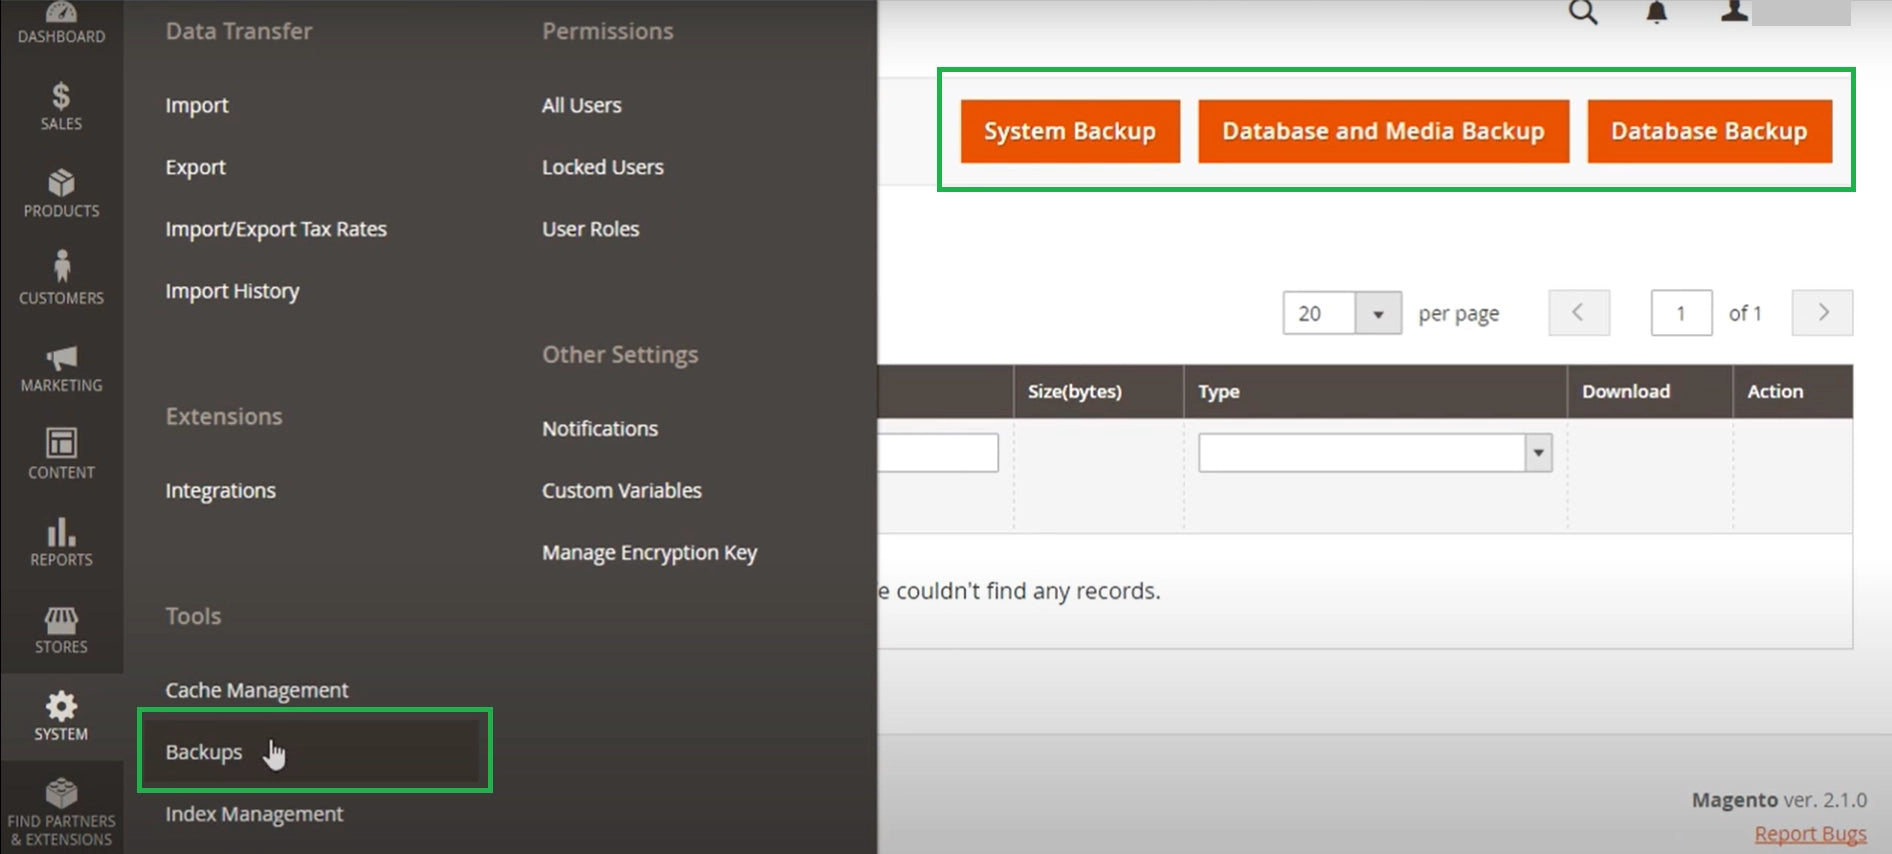 Magento admin’s system with the option for backups